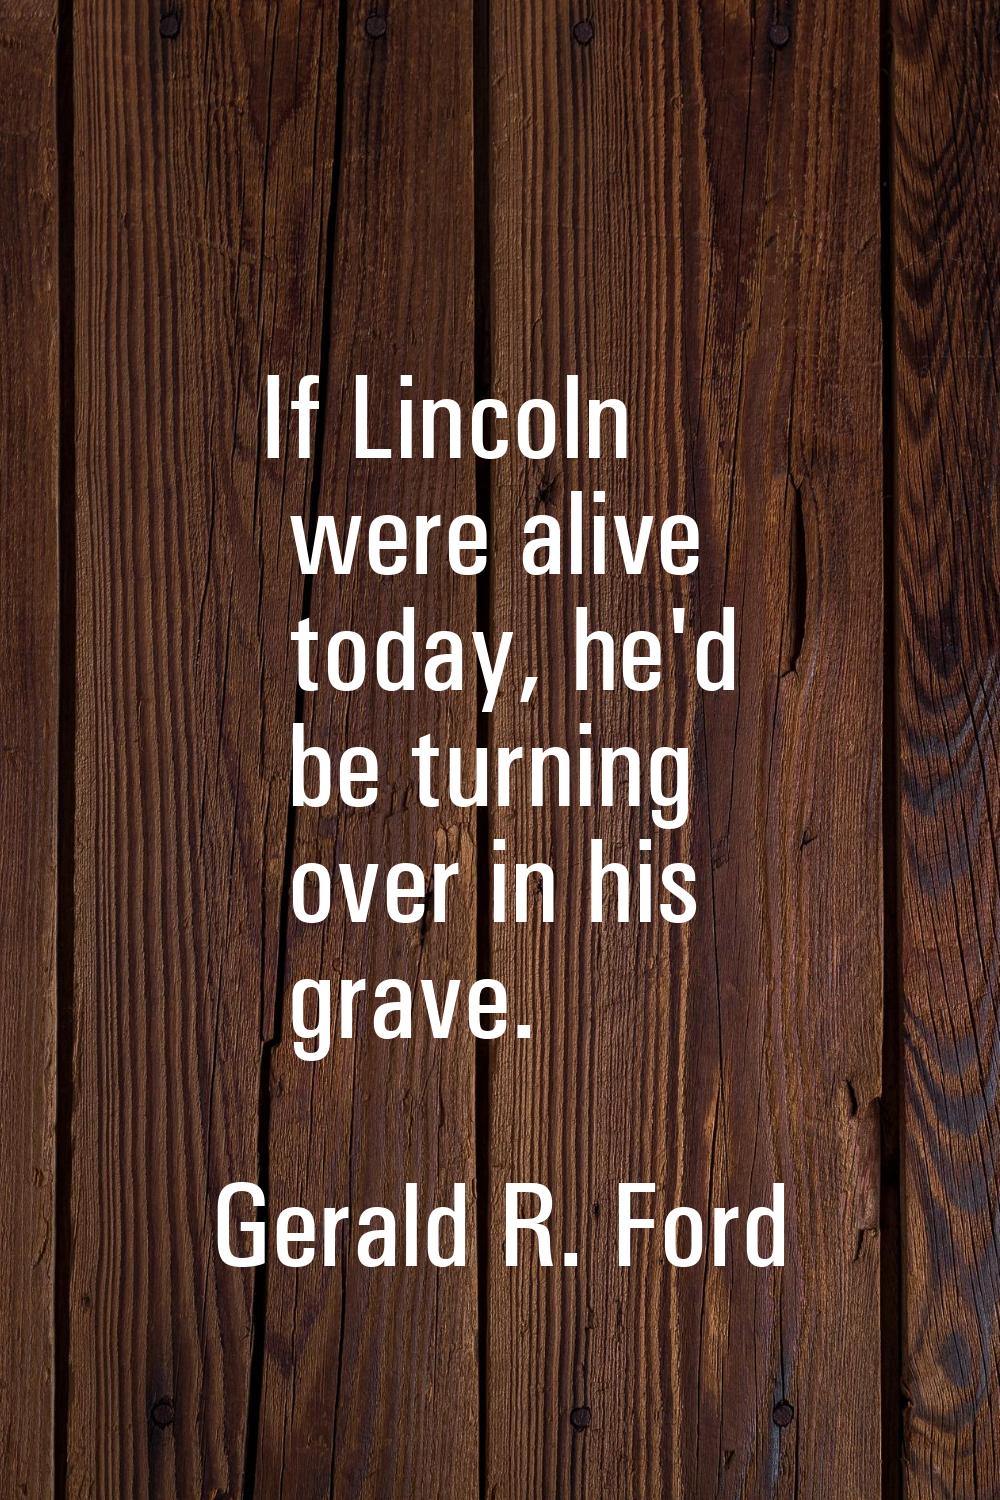 If Lincoln were alive today, he'd be turning over in his grave.